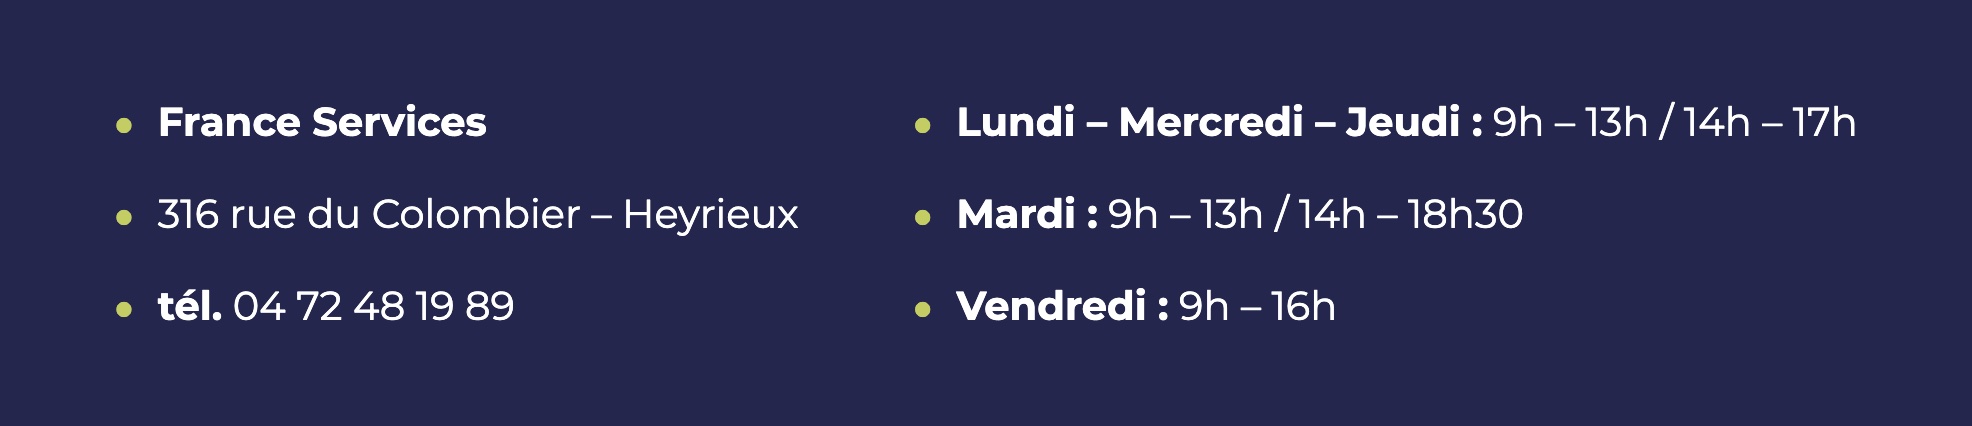 france services horaires heyrieux